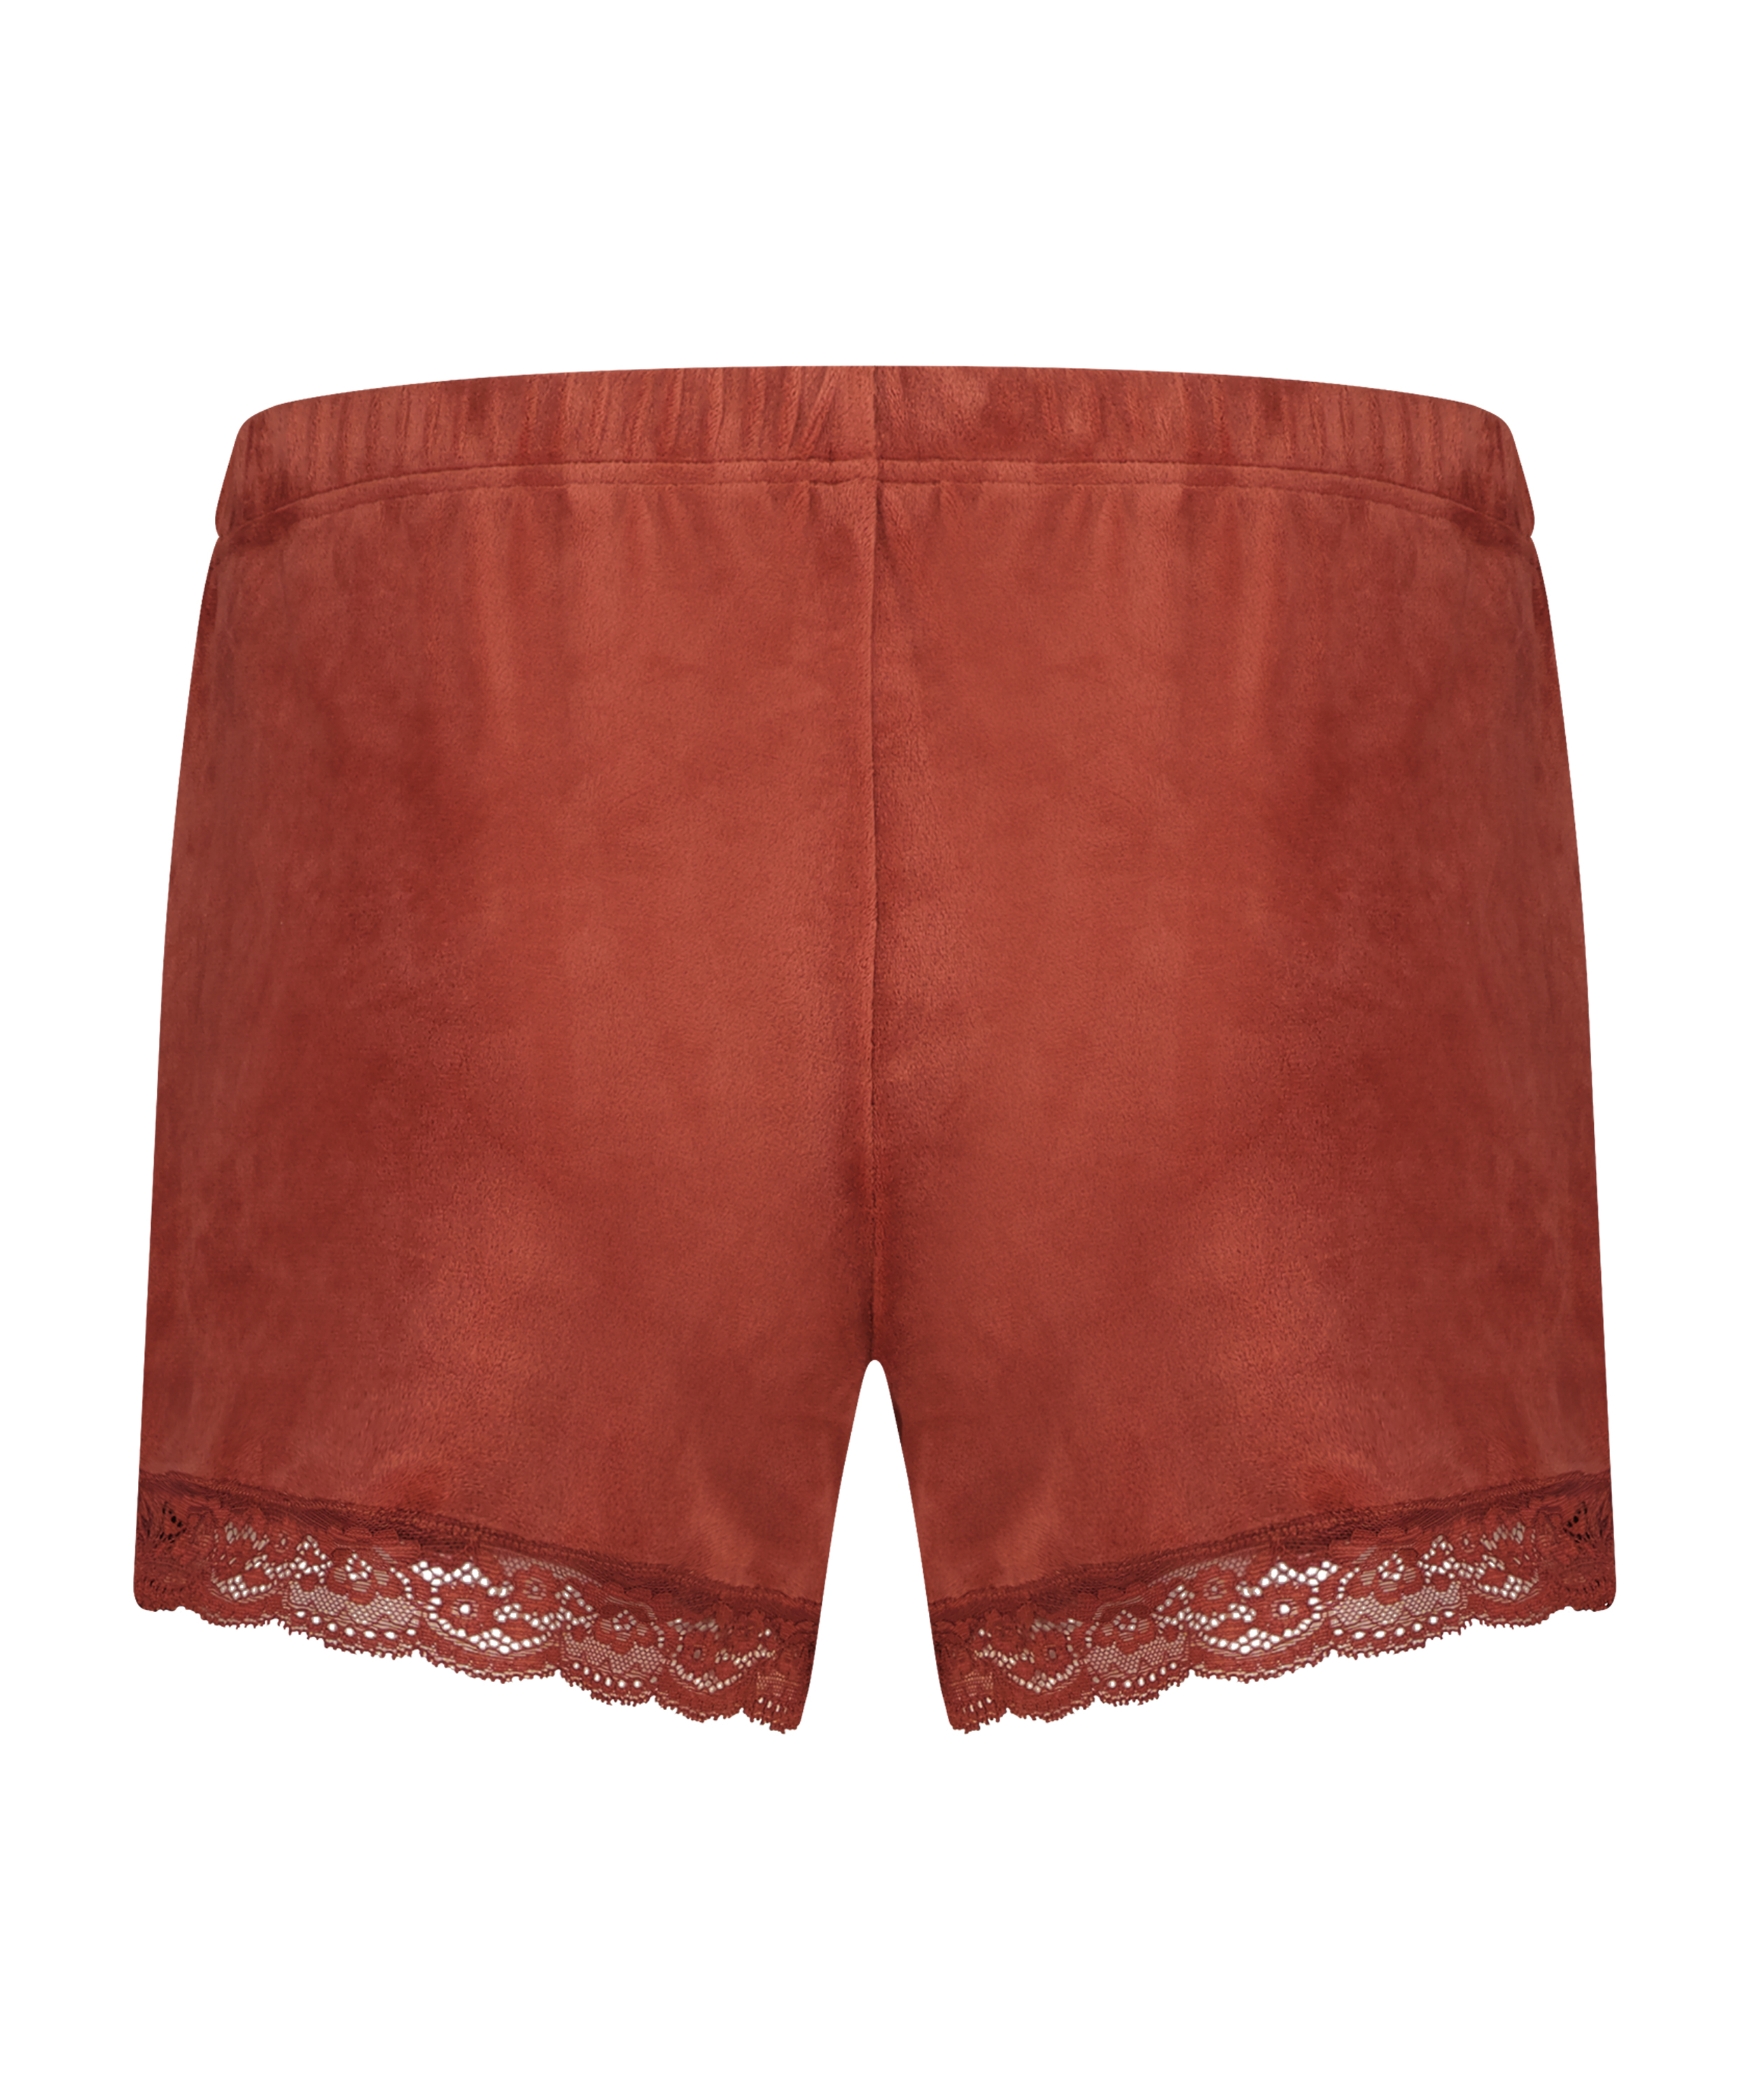 Shorts velour Lace, Brown, main